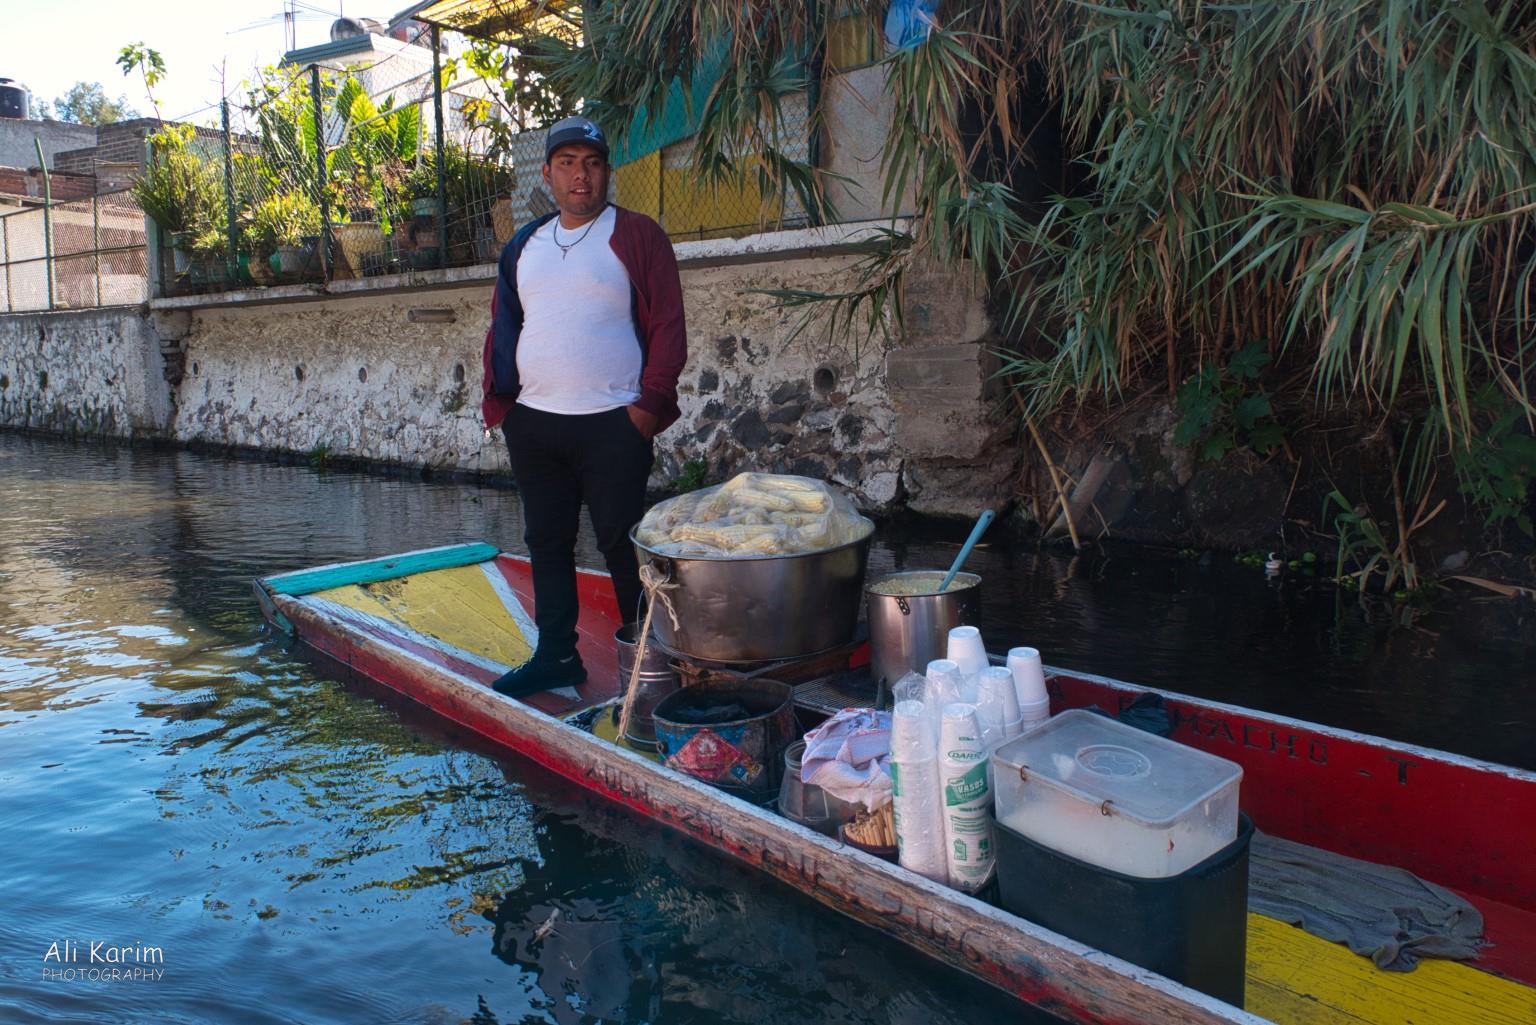 Mexico City, Mexico, Dec 2019, Vendor boats plied the waterways selling everything from cerveza to all kinds of foods, fruits, flowers, trinkets etc